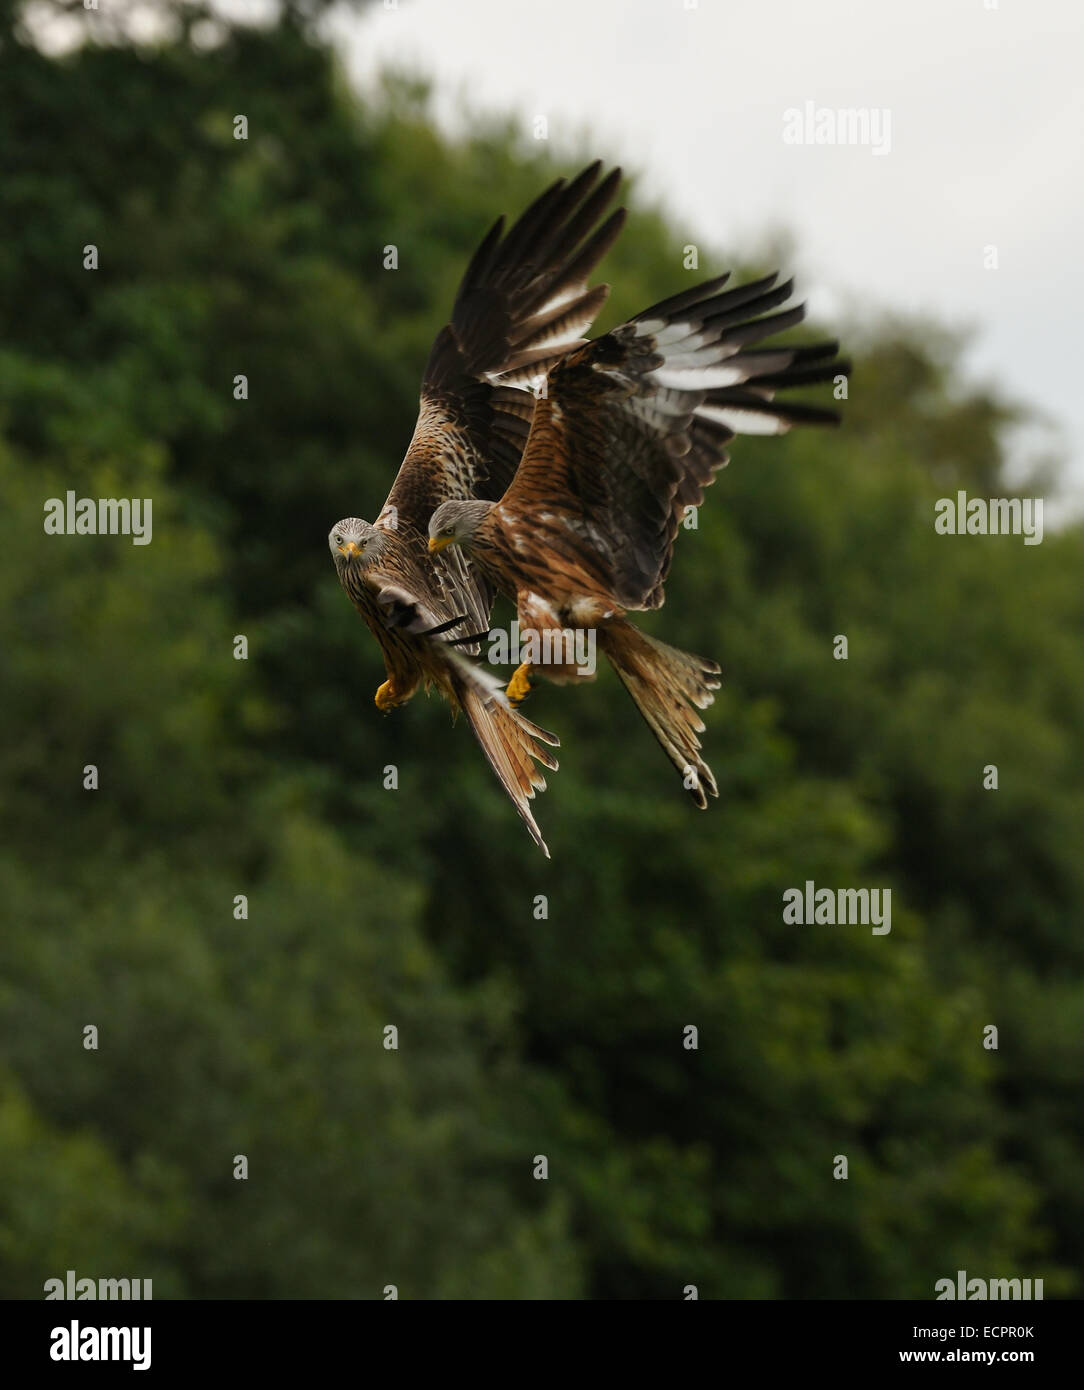 Red kite, Milvus milvus flying above a field with trees and sky in the background near Rhayader in Wales, United Kingdom Stock Photo